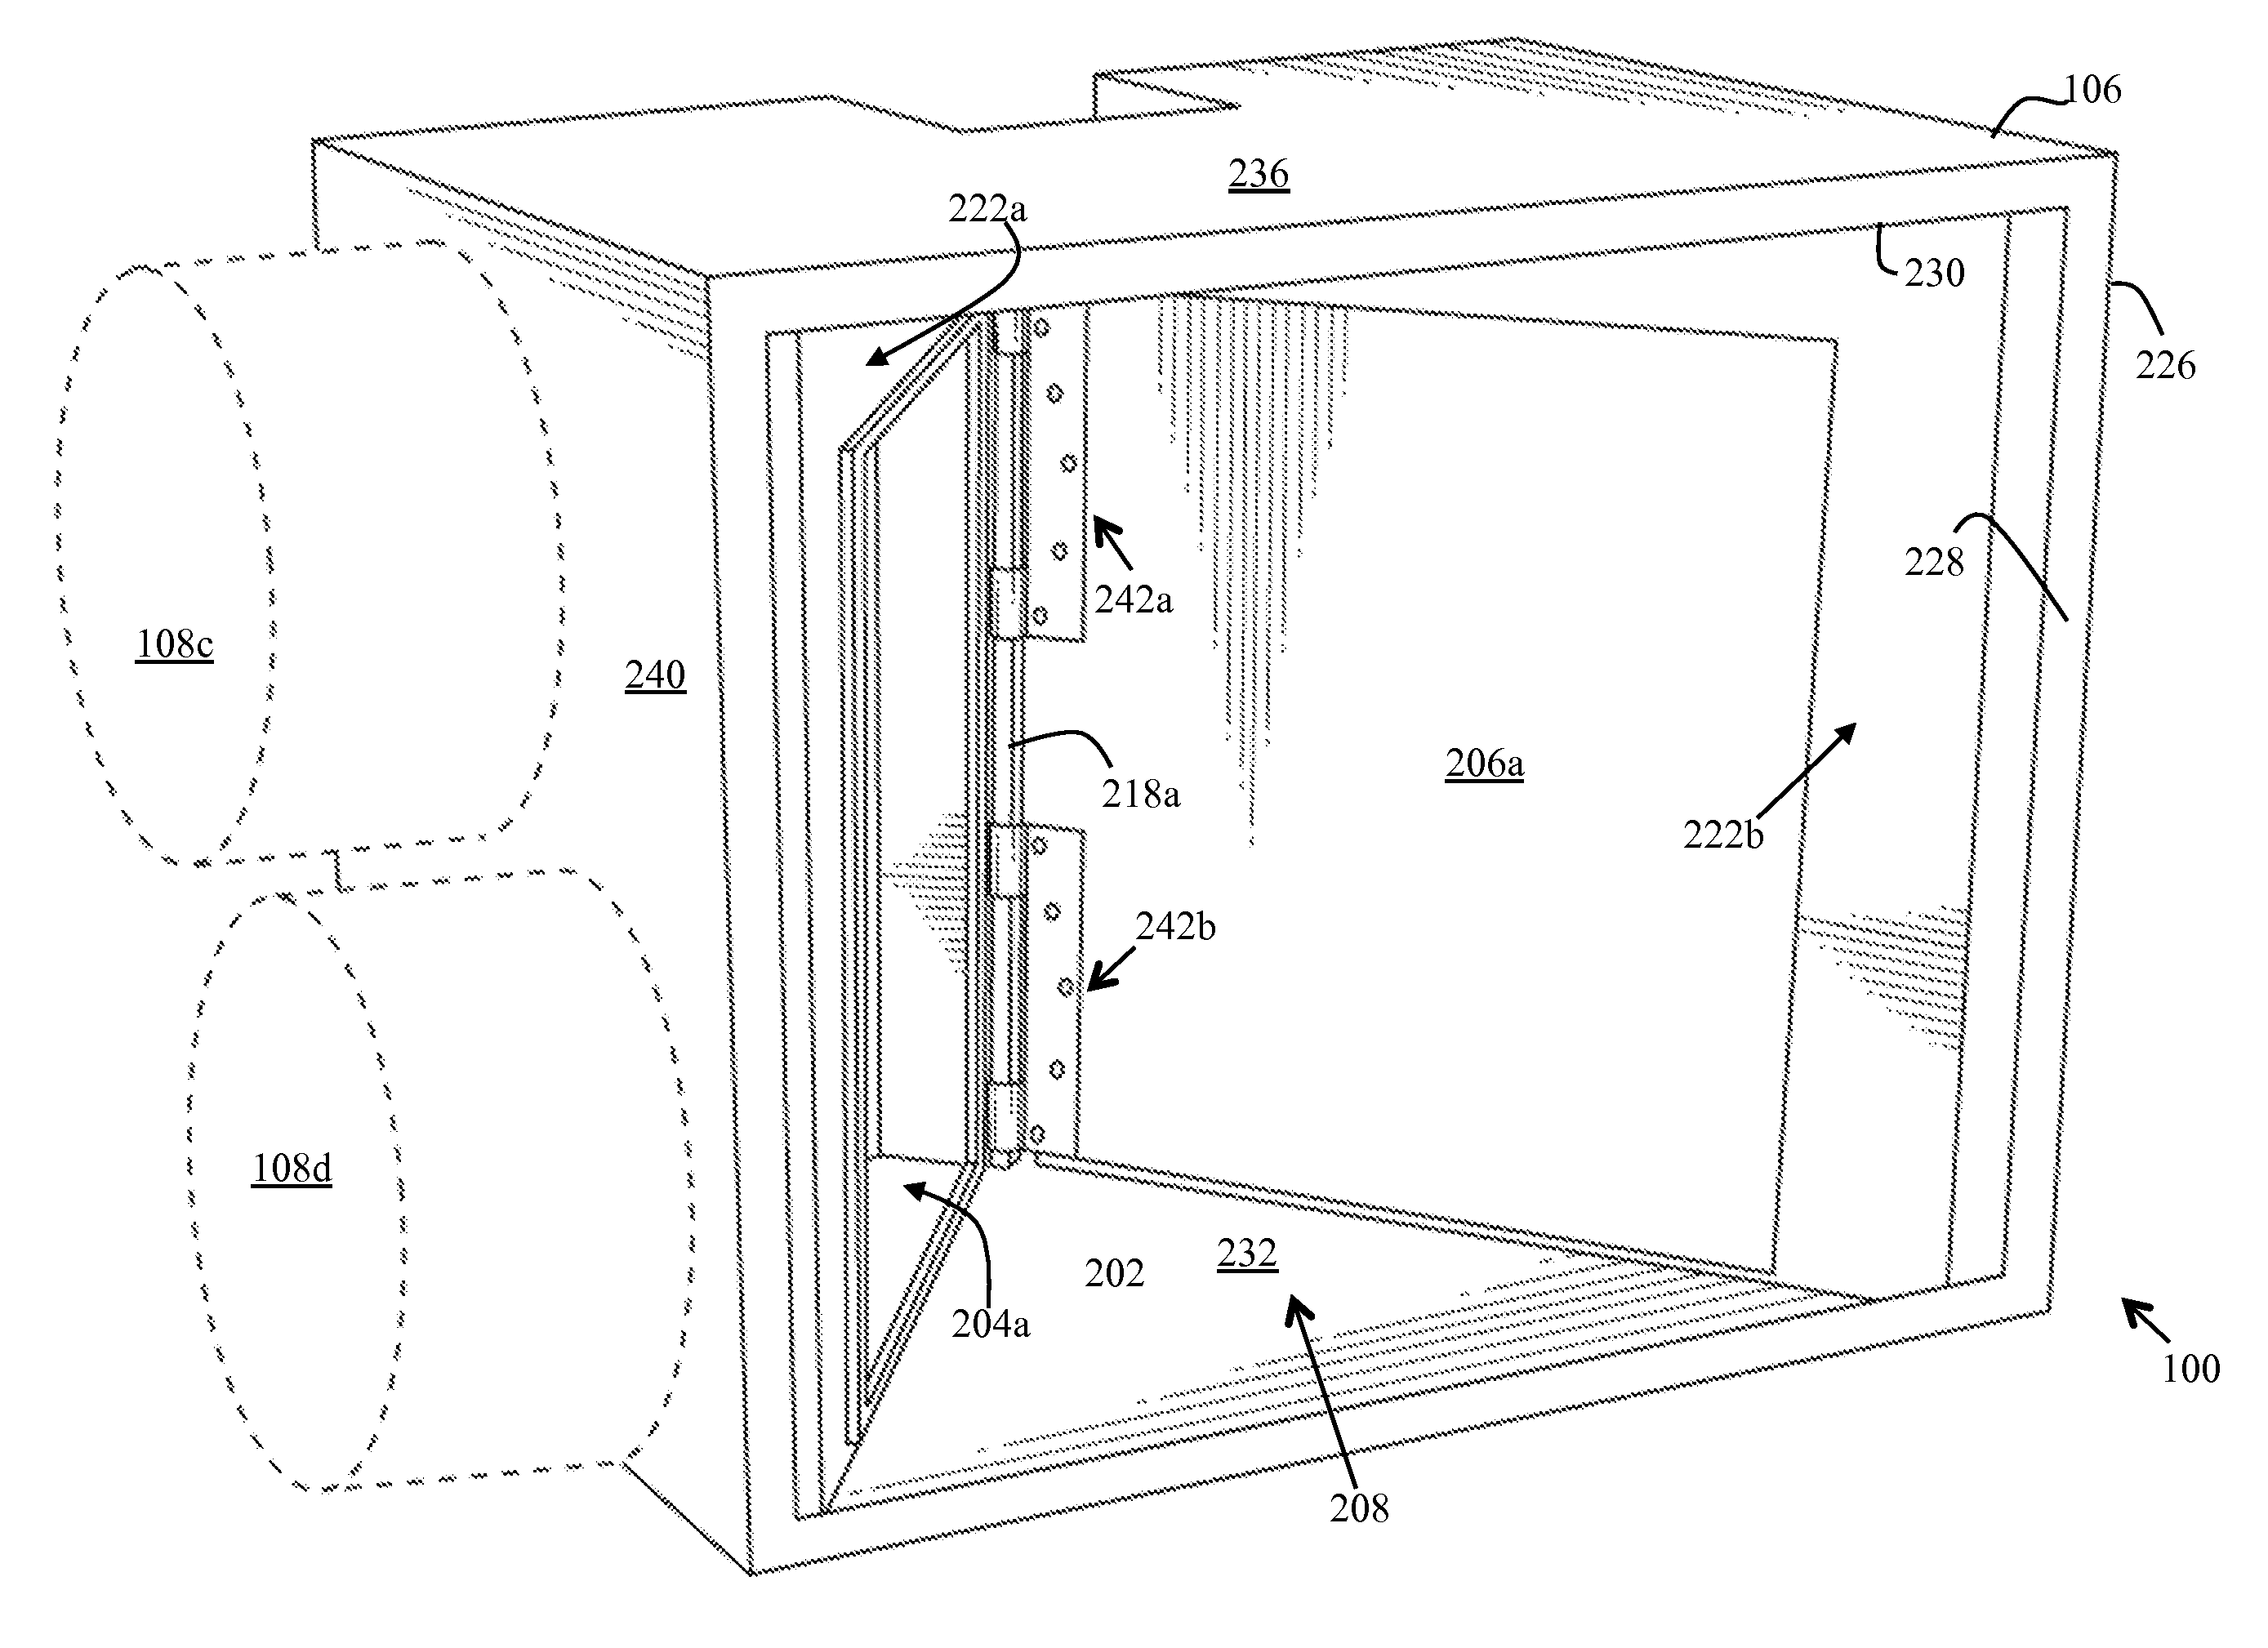 Integrated self-contained plenum module